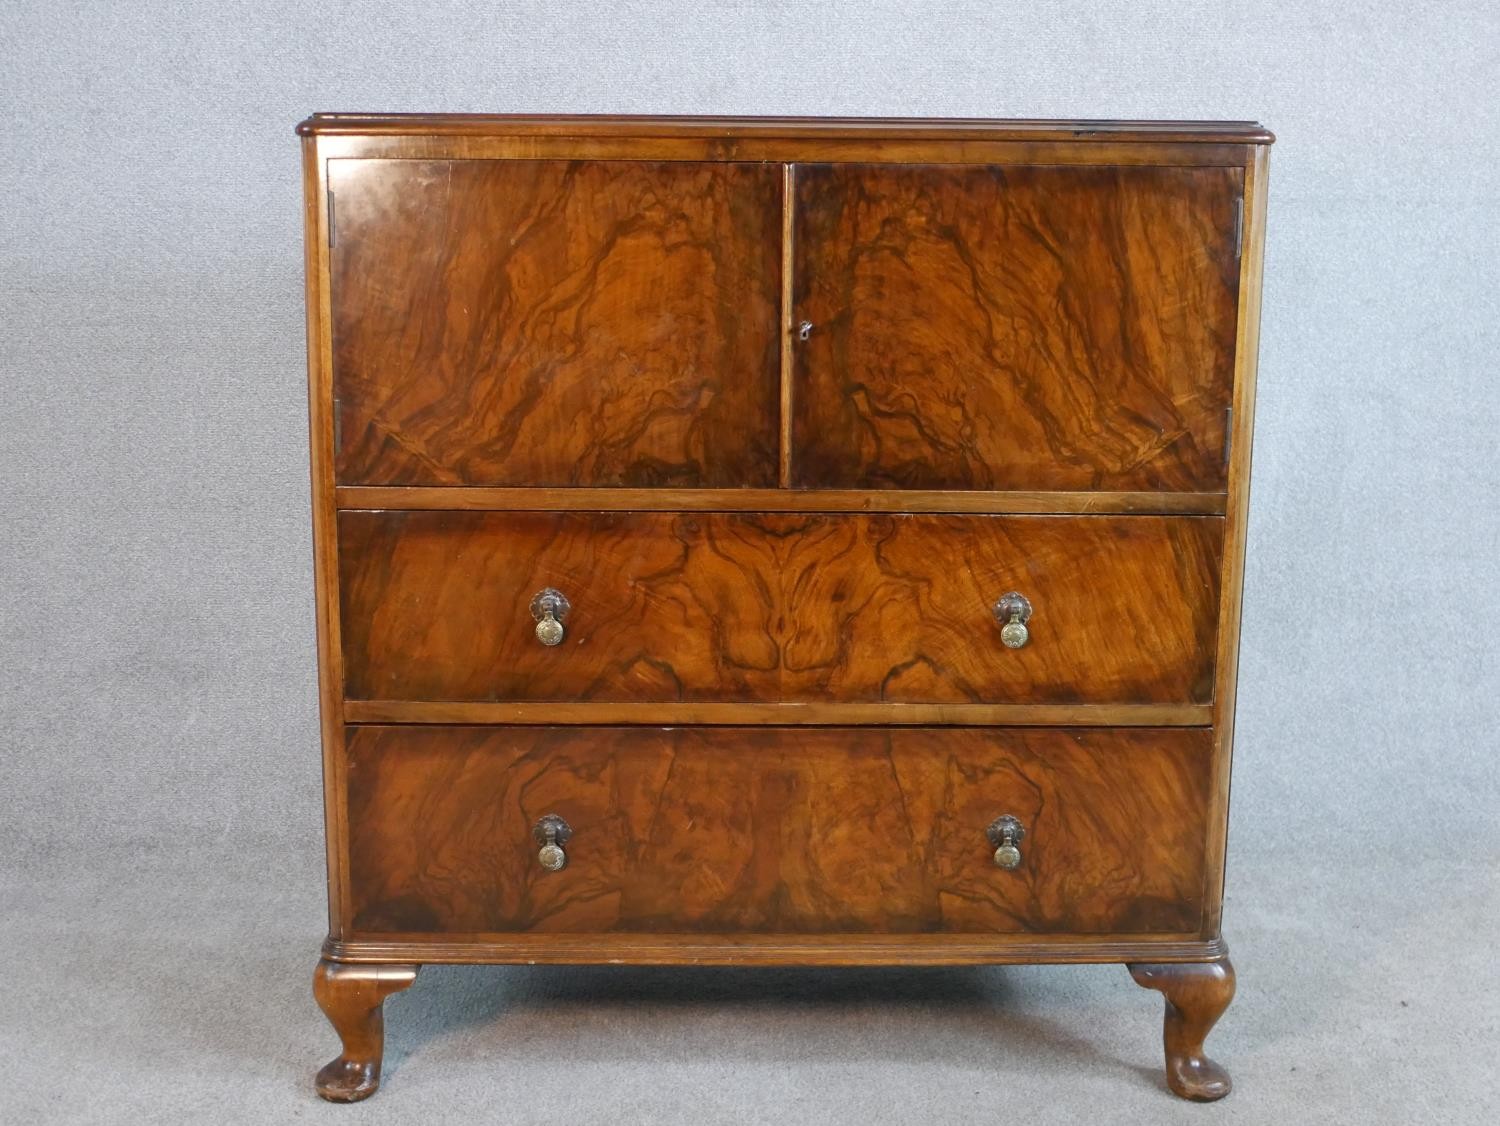 A circa 1930s figured walnut side cabinet, with two cupboard doors enclosing a shelf, over two